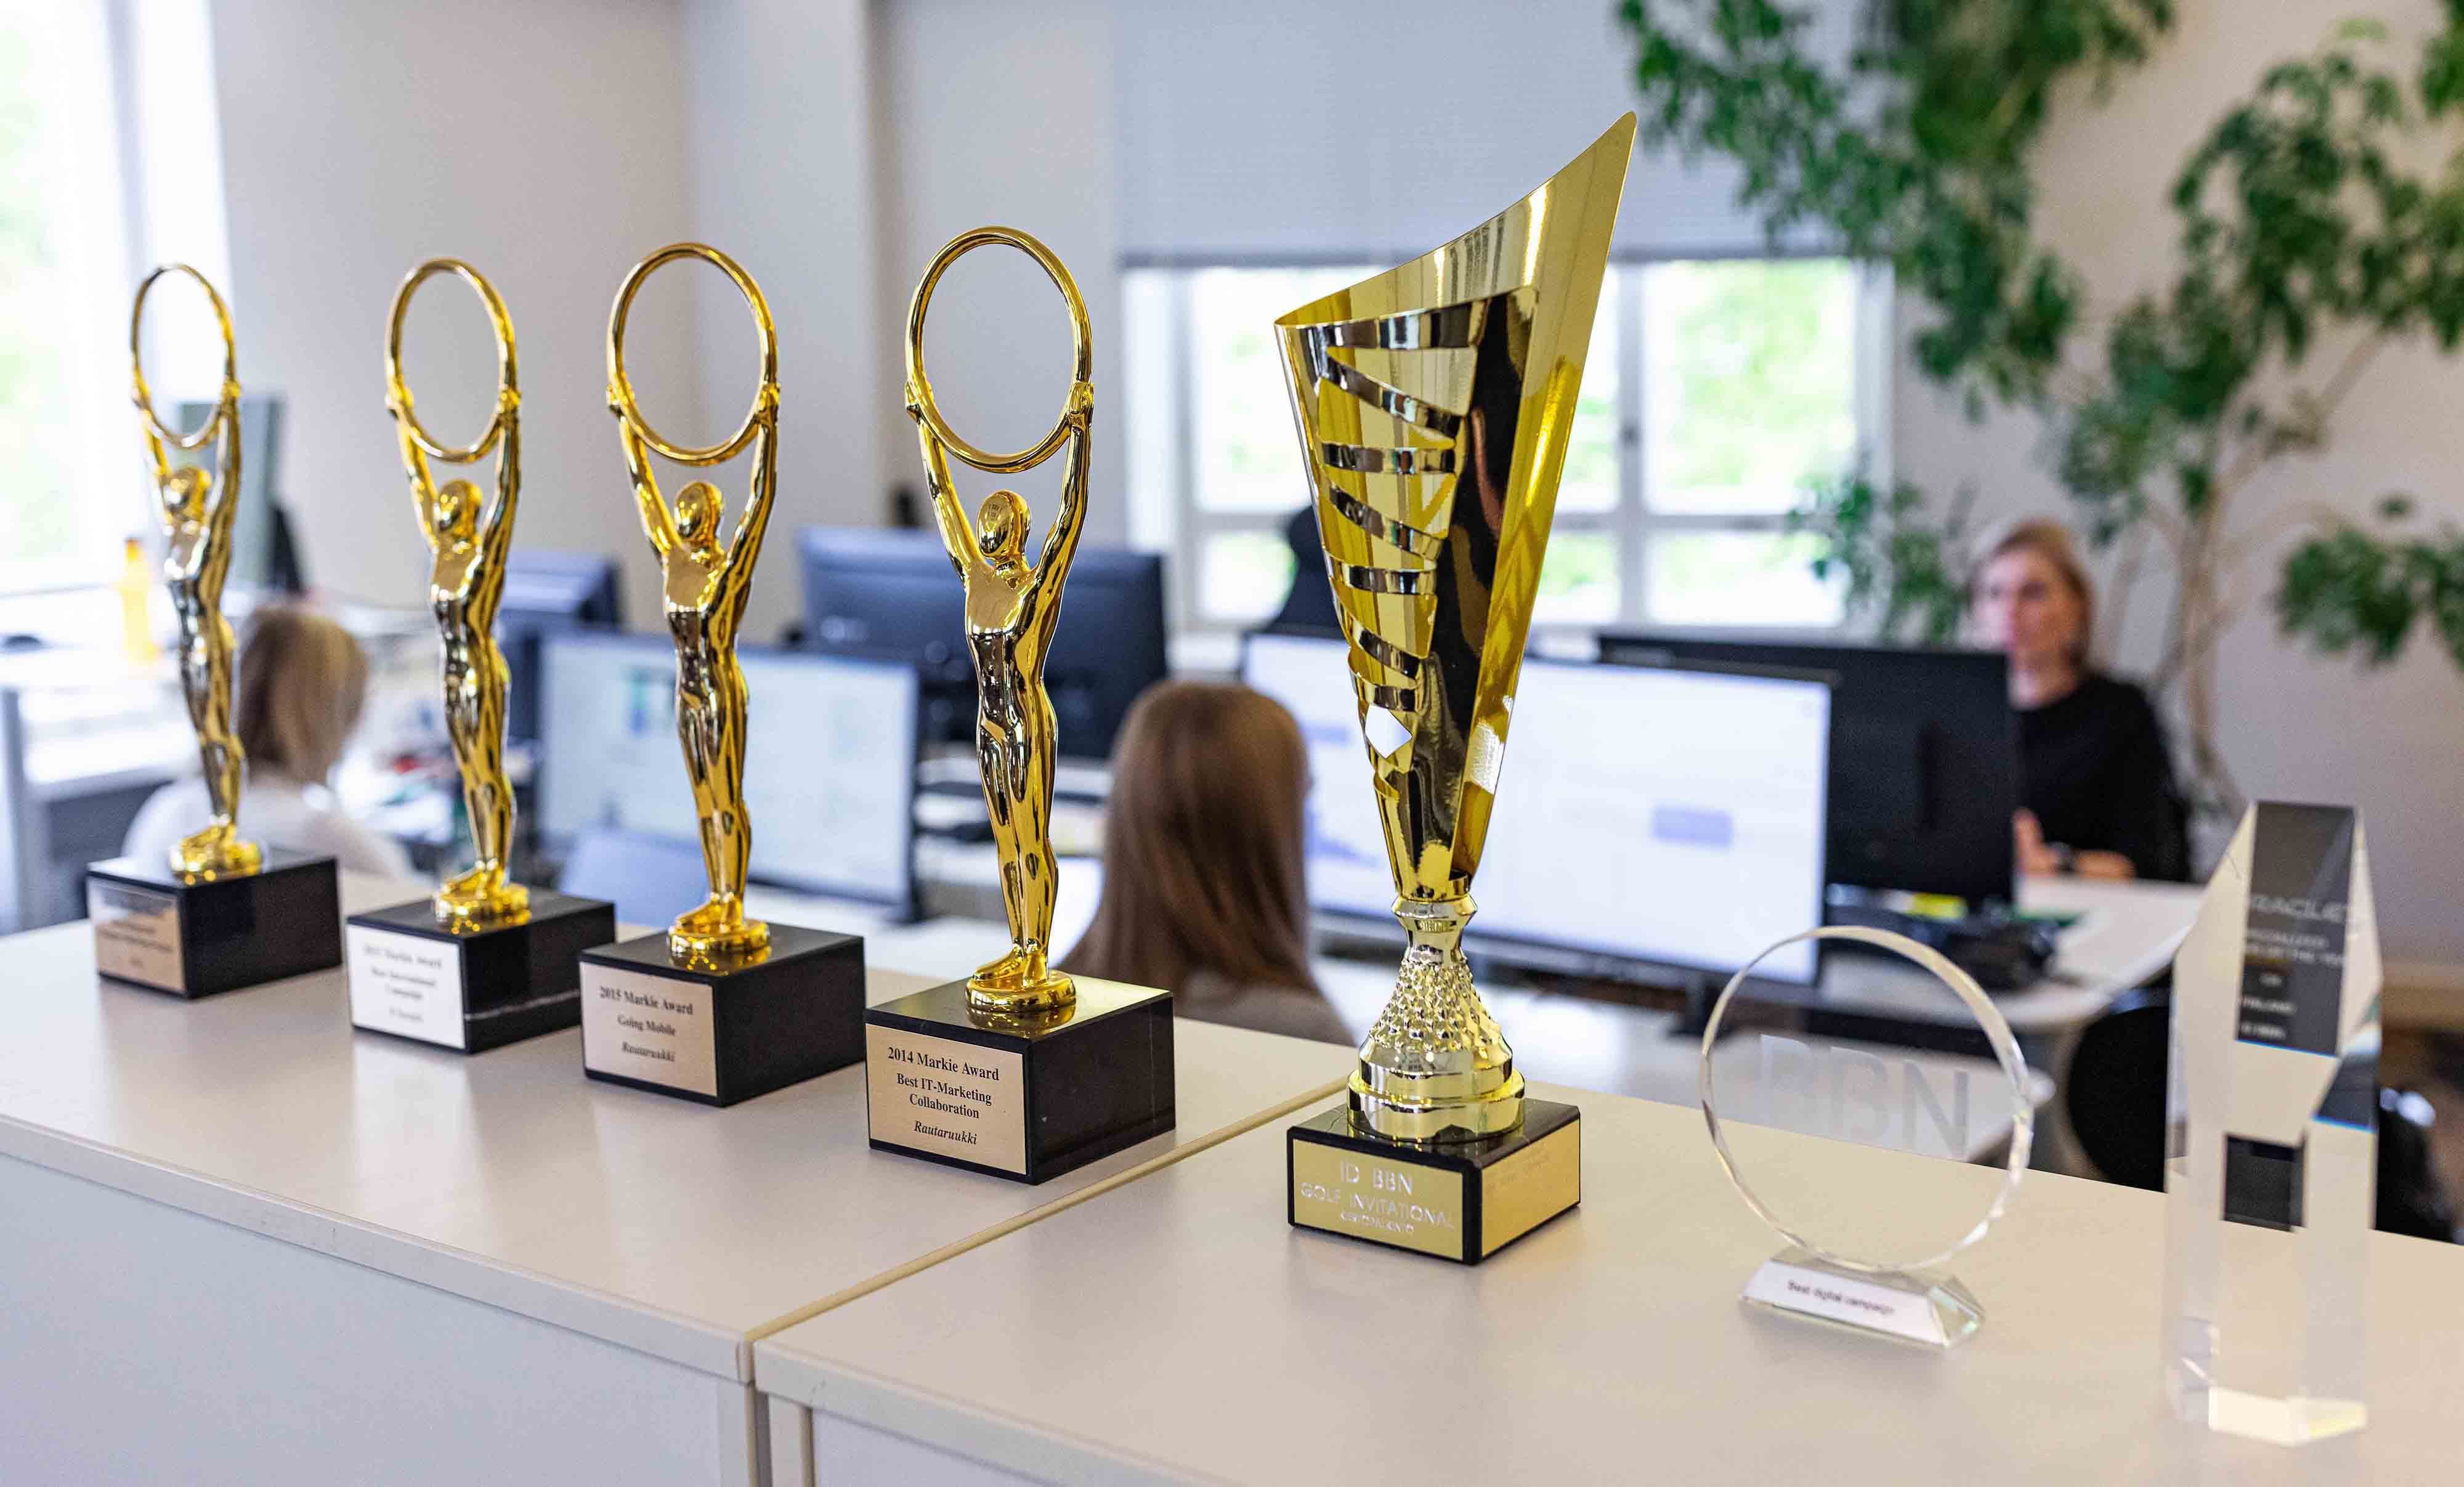 awards displayed in office